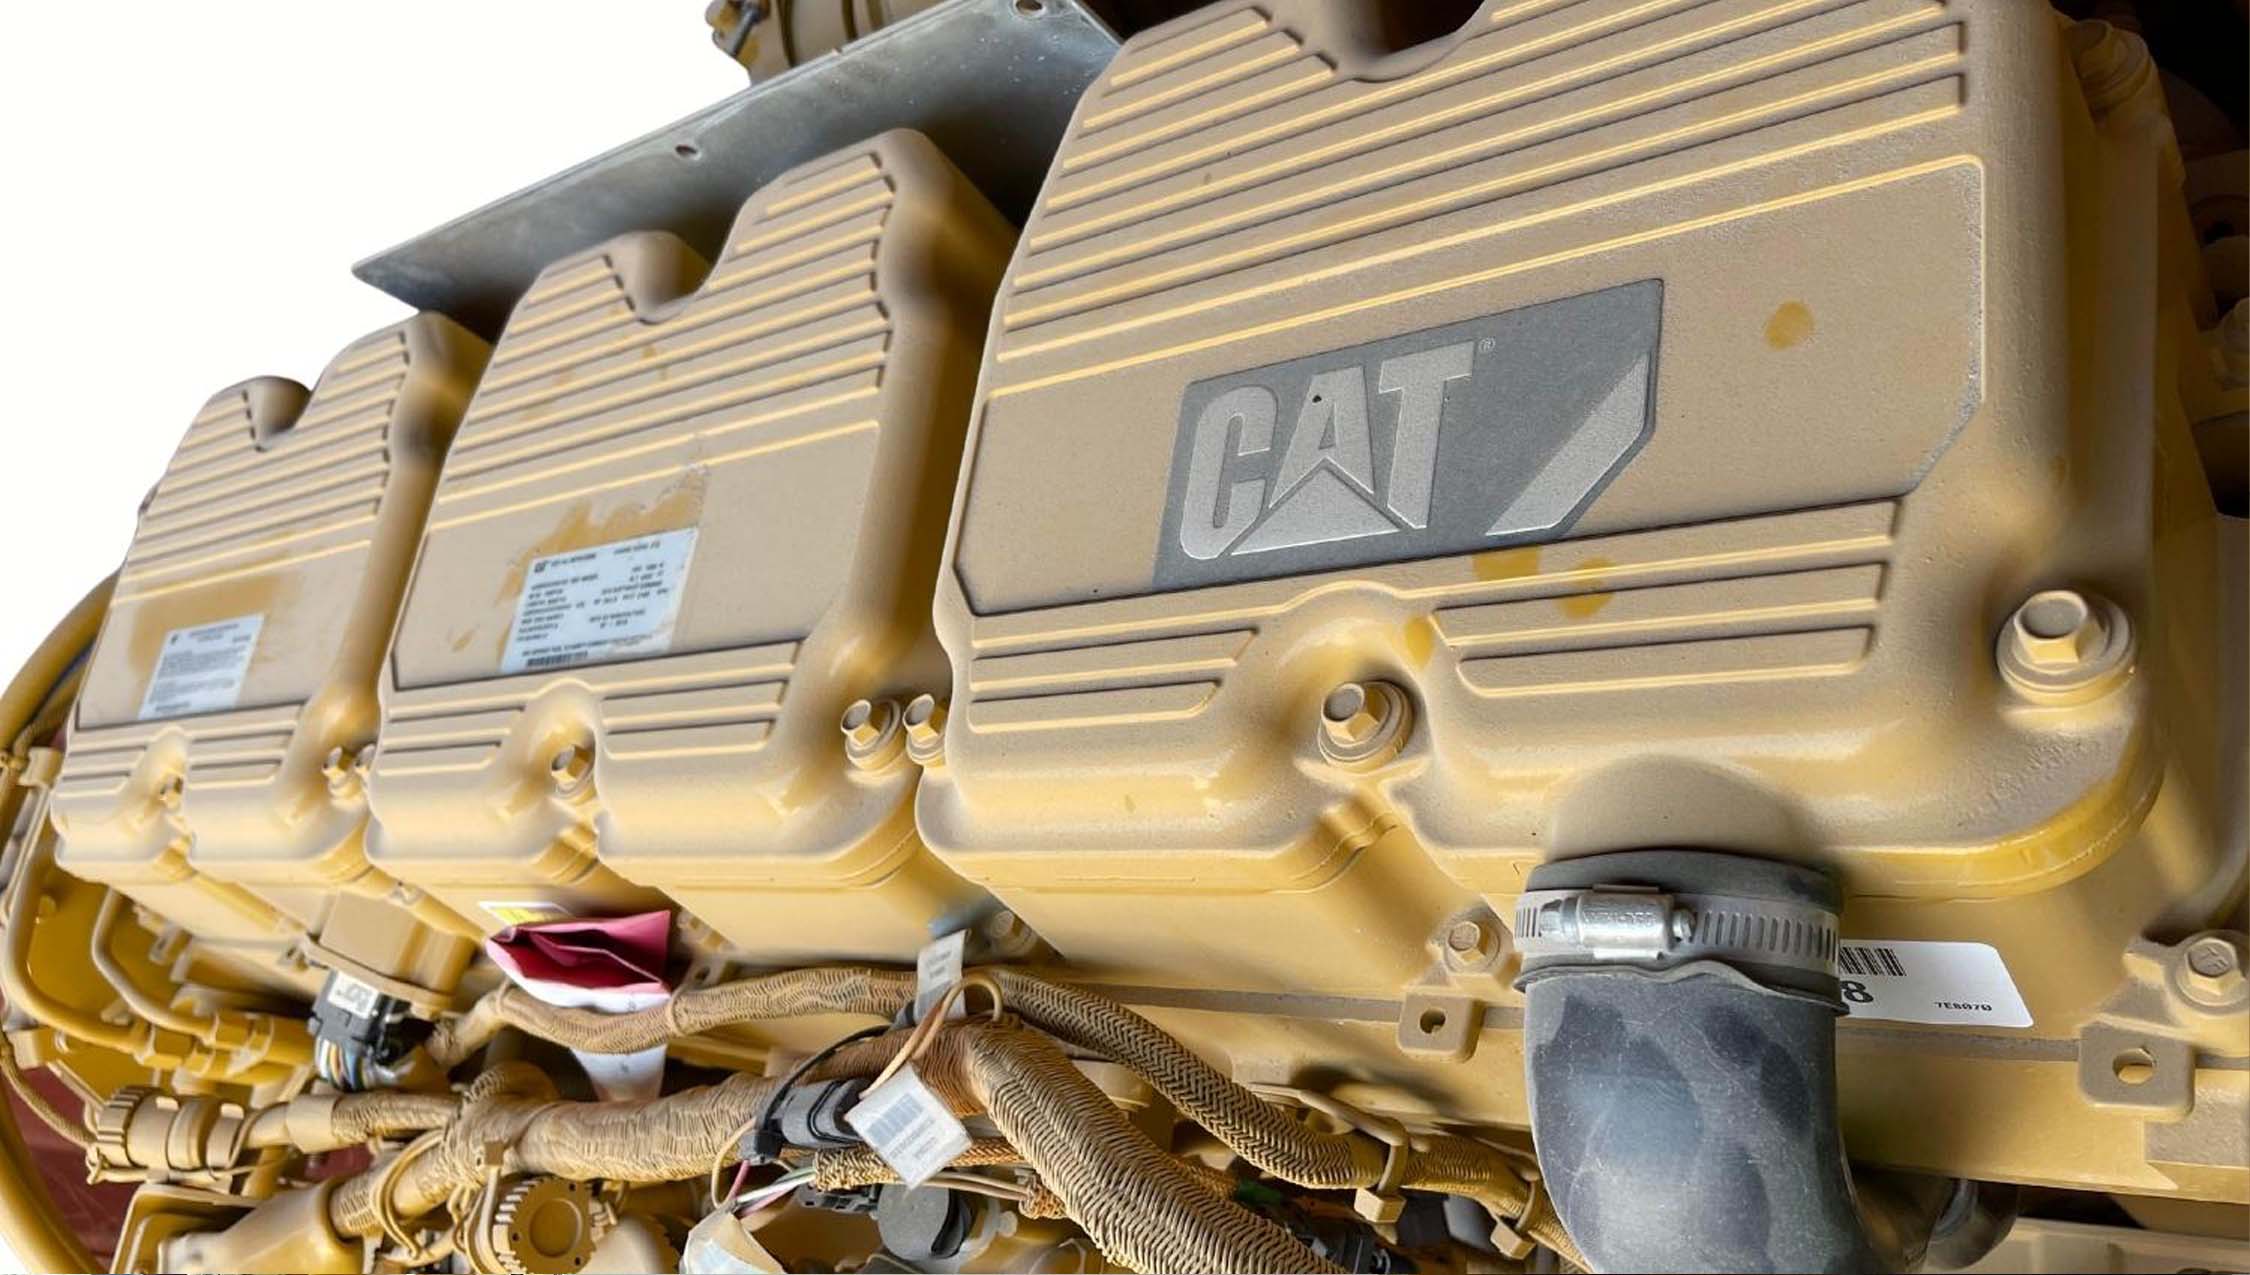 cat engine buy, cat engine for sell, new cat engine near me for buy